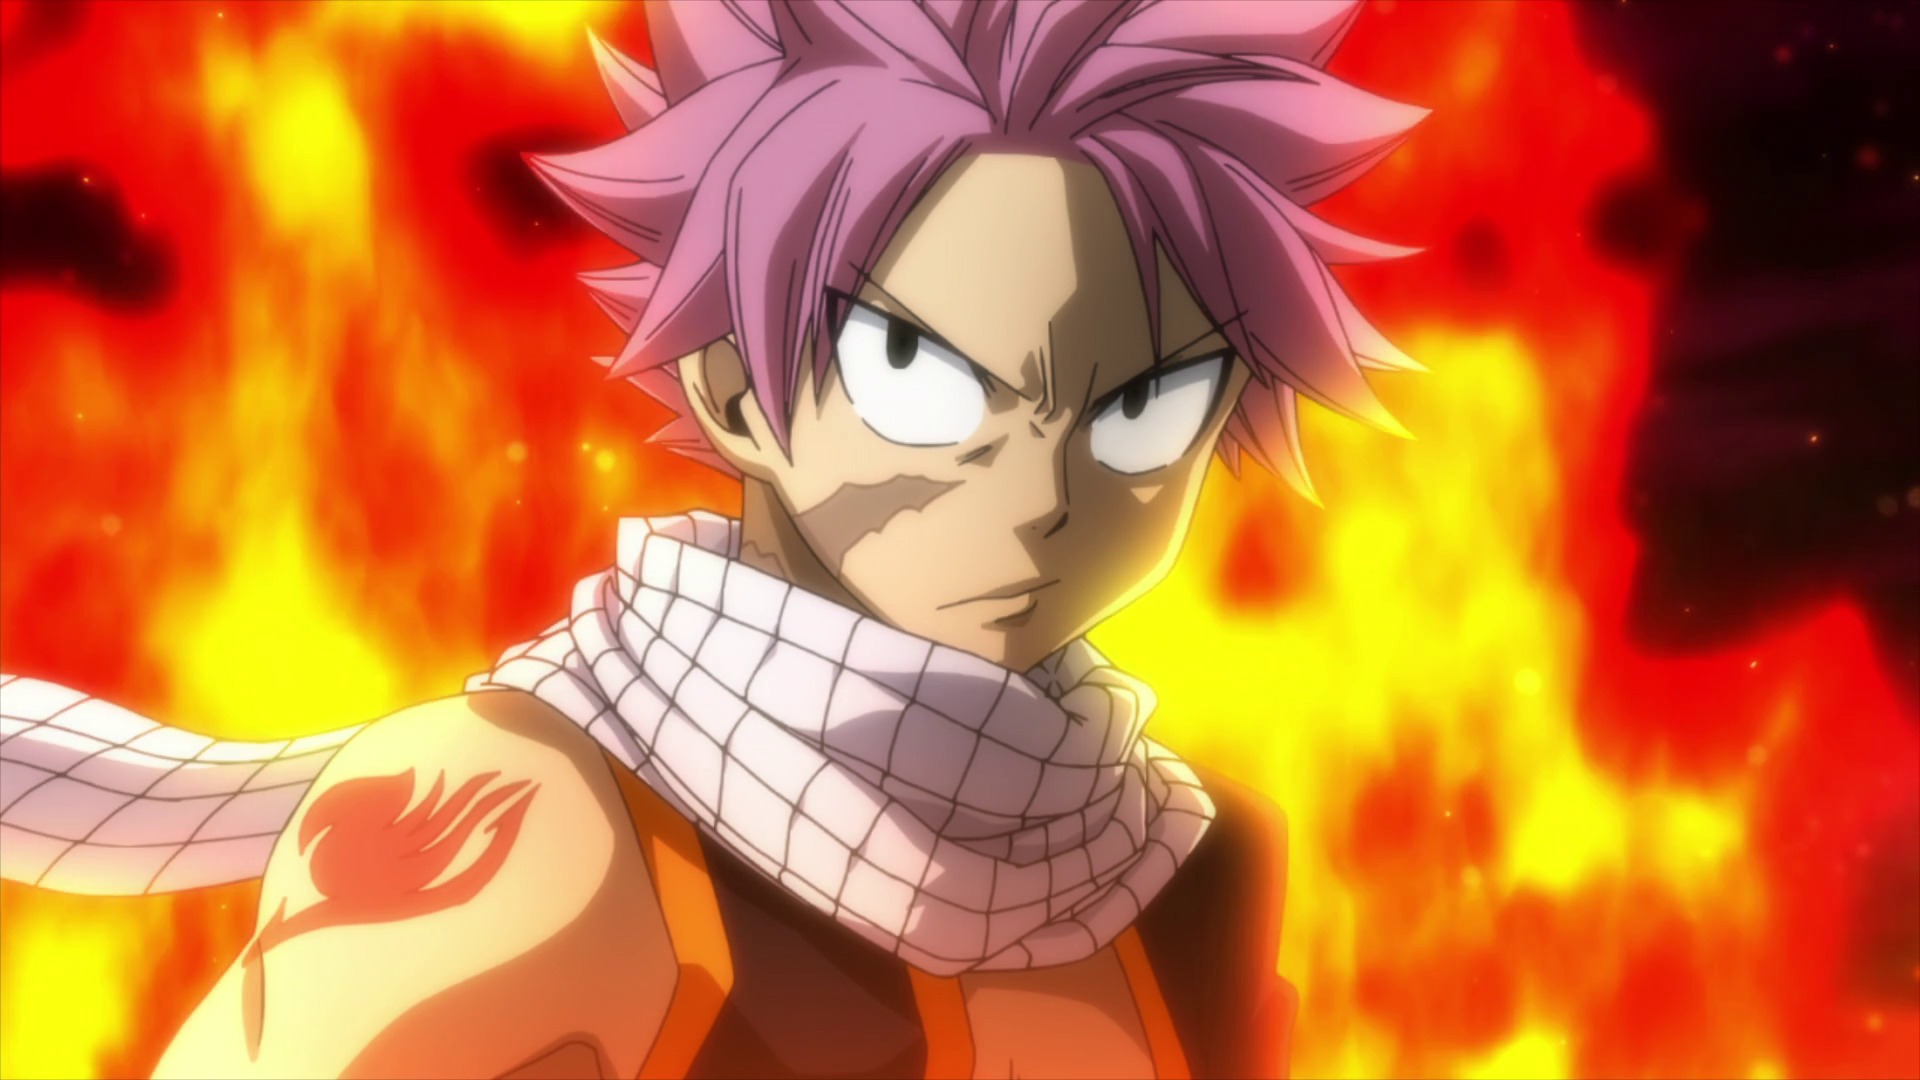 Fairy Tail Episode 319 spoilers release date